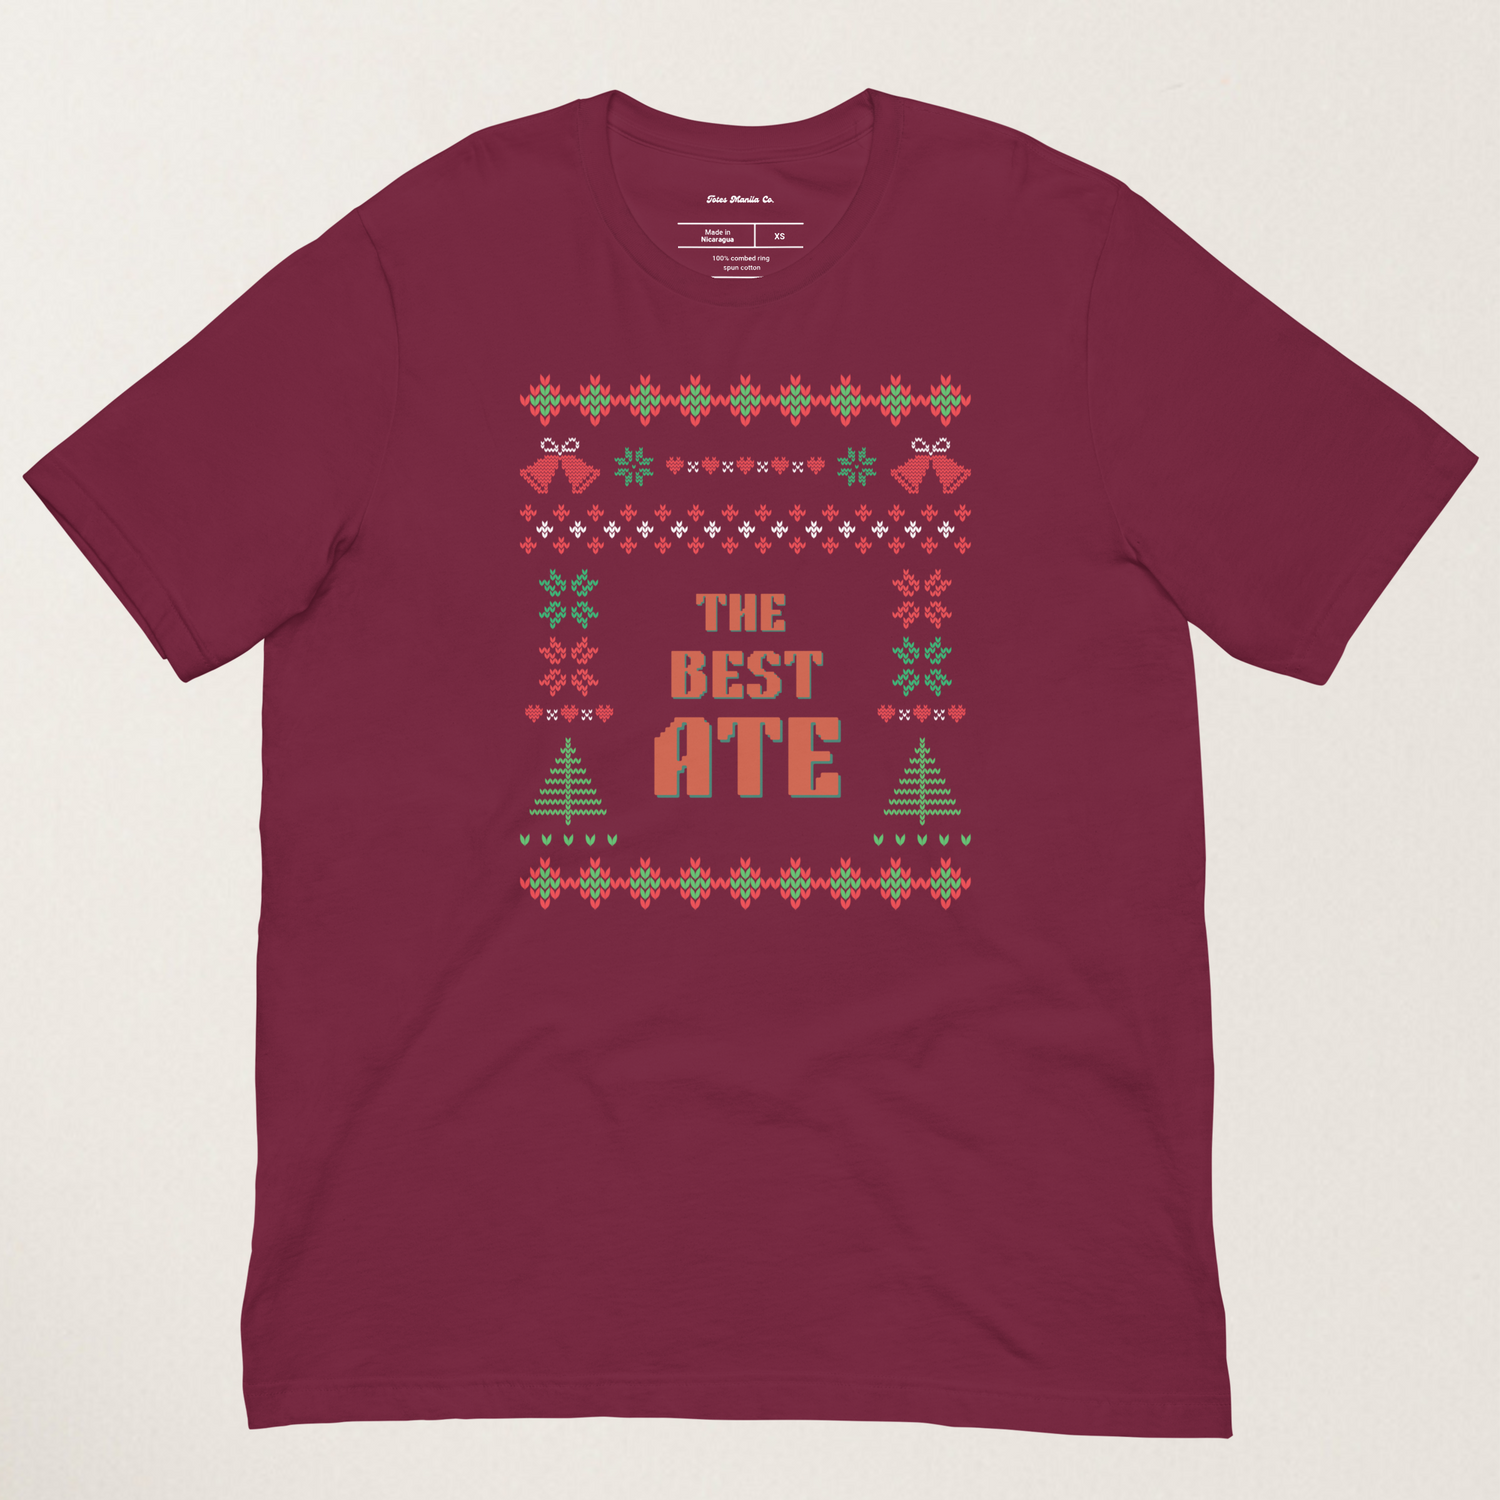 The Best Ate Filipino Big Sister Thanksgiving Christmas Shirt in Maroon